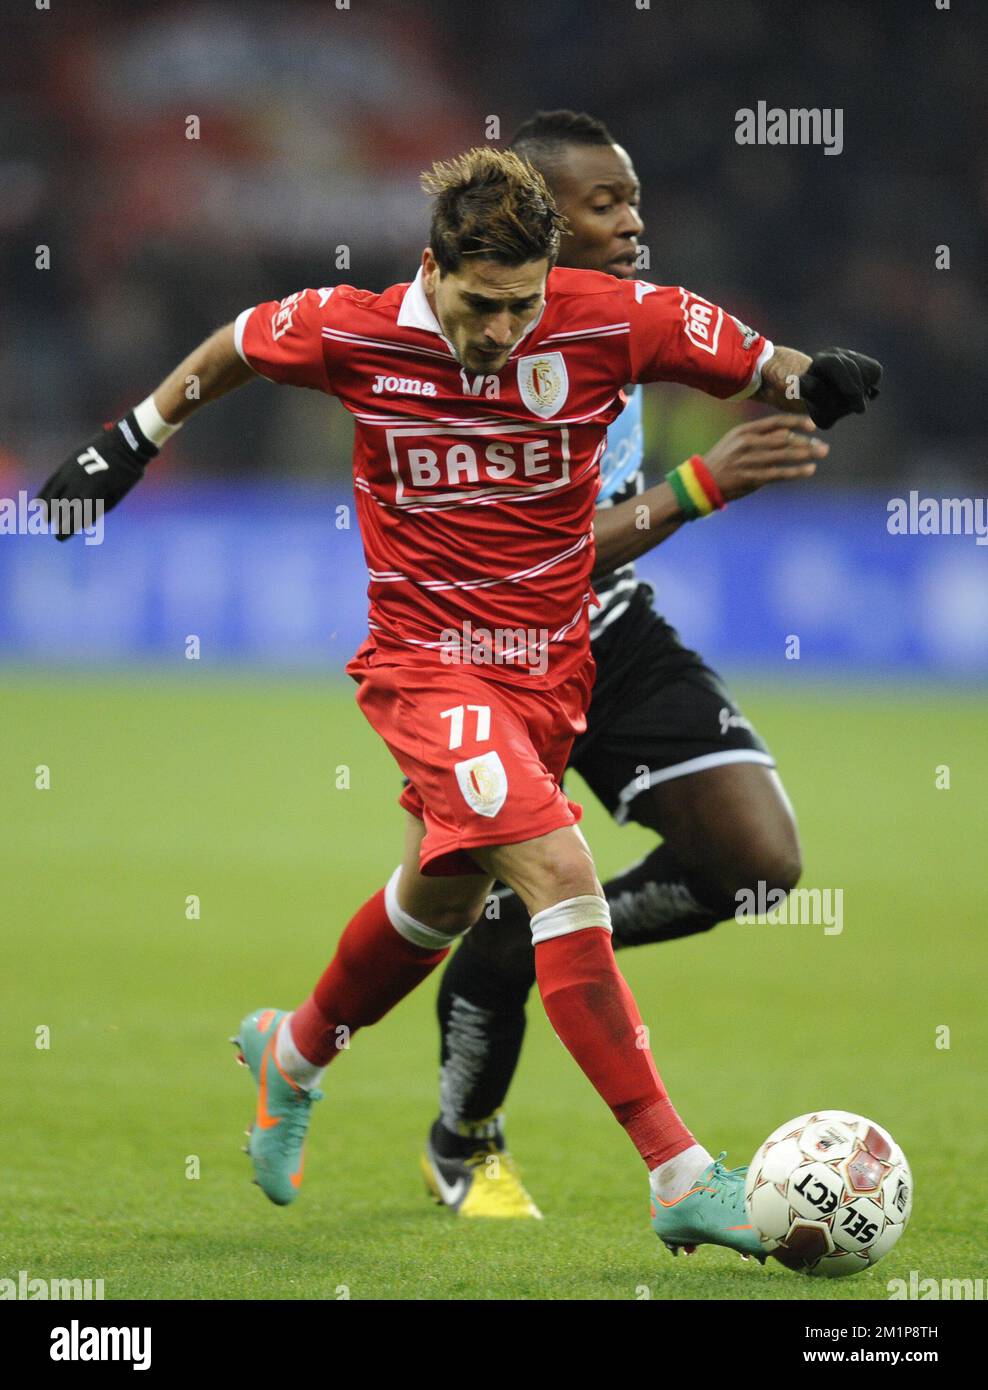 20121207 - LIEGE, BELGIUM: Standard's Maor Bar Buzaglo fights for the ball during the Jupiler Pro League match between Standard and Charleroi, in Liege, Friday 07 December 2012, on day 19 of the Belgian soccer championship. BELGA PHOTO JOHN THYS Stock Photo